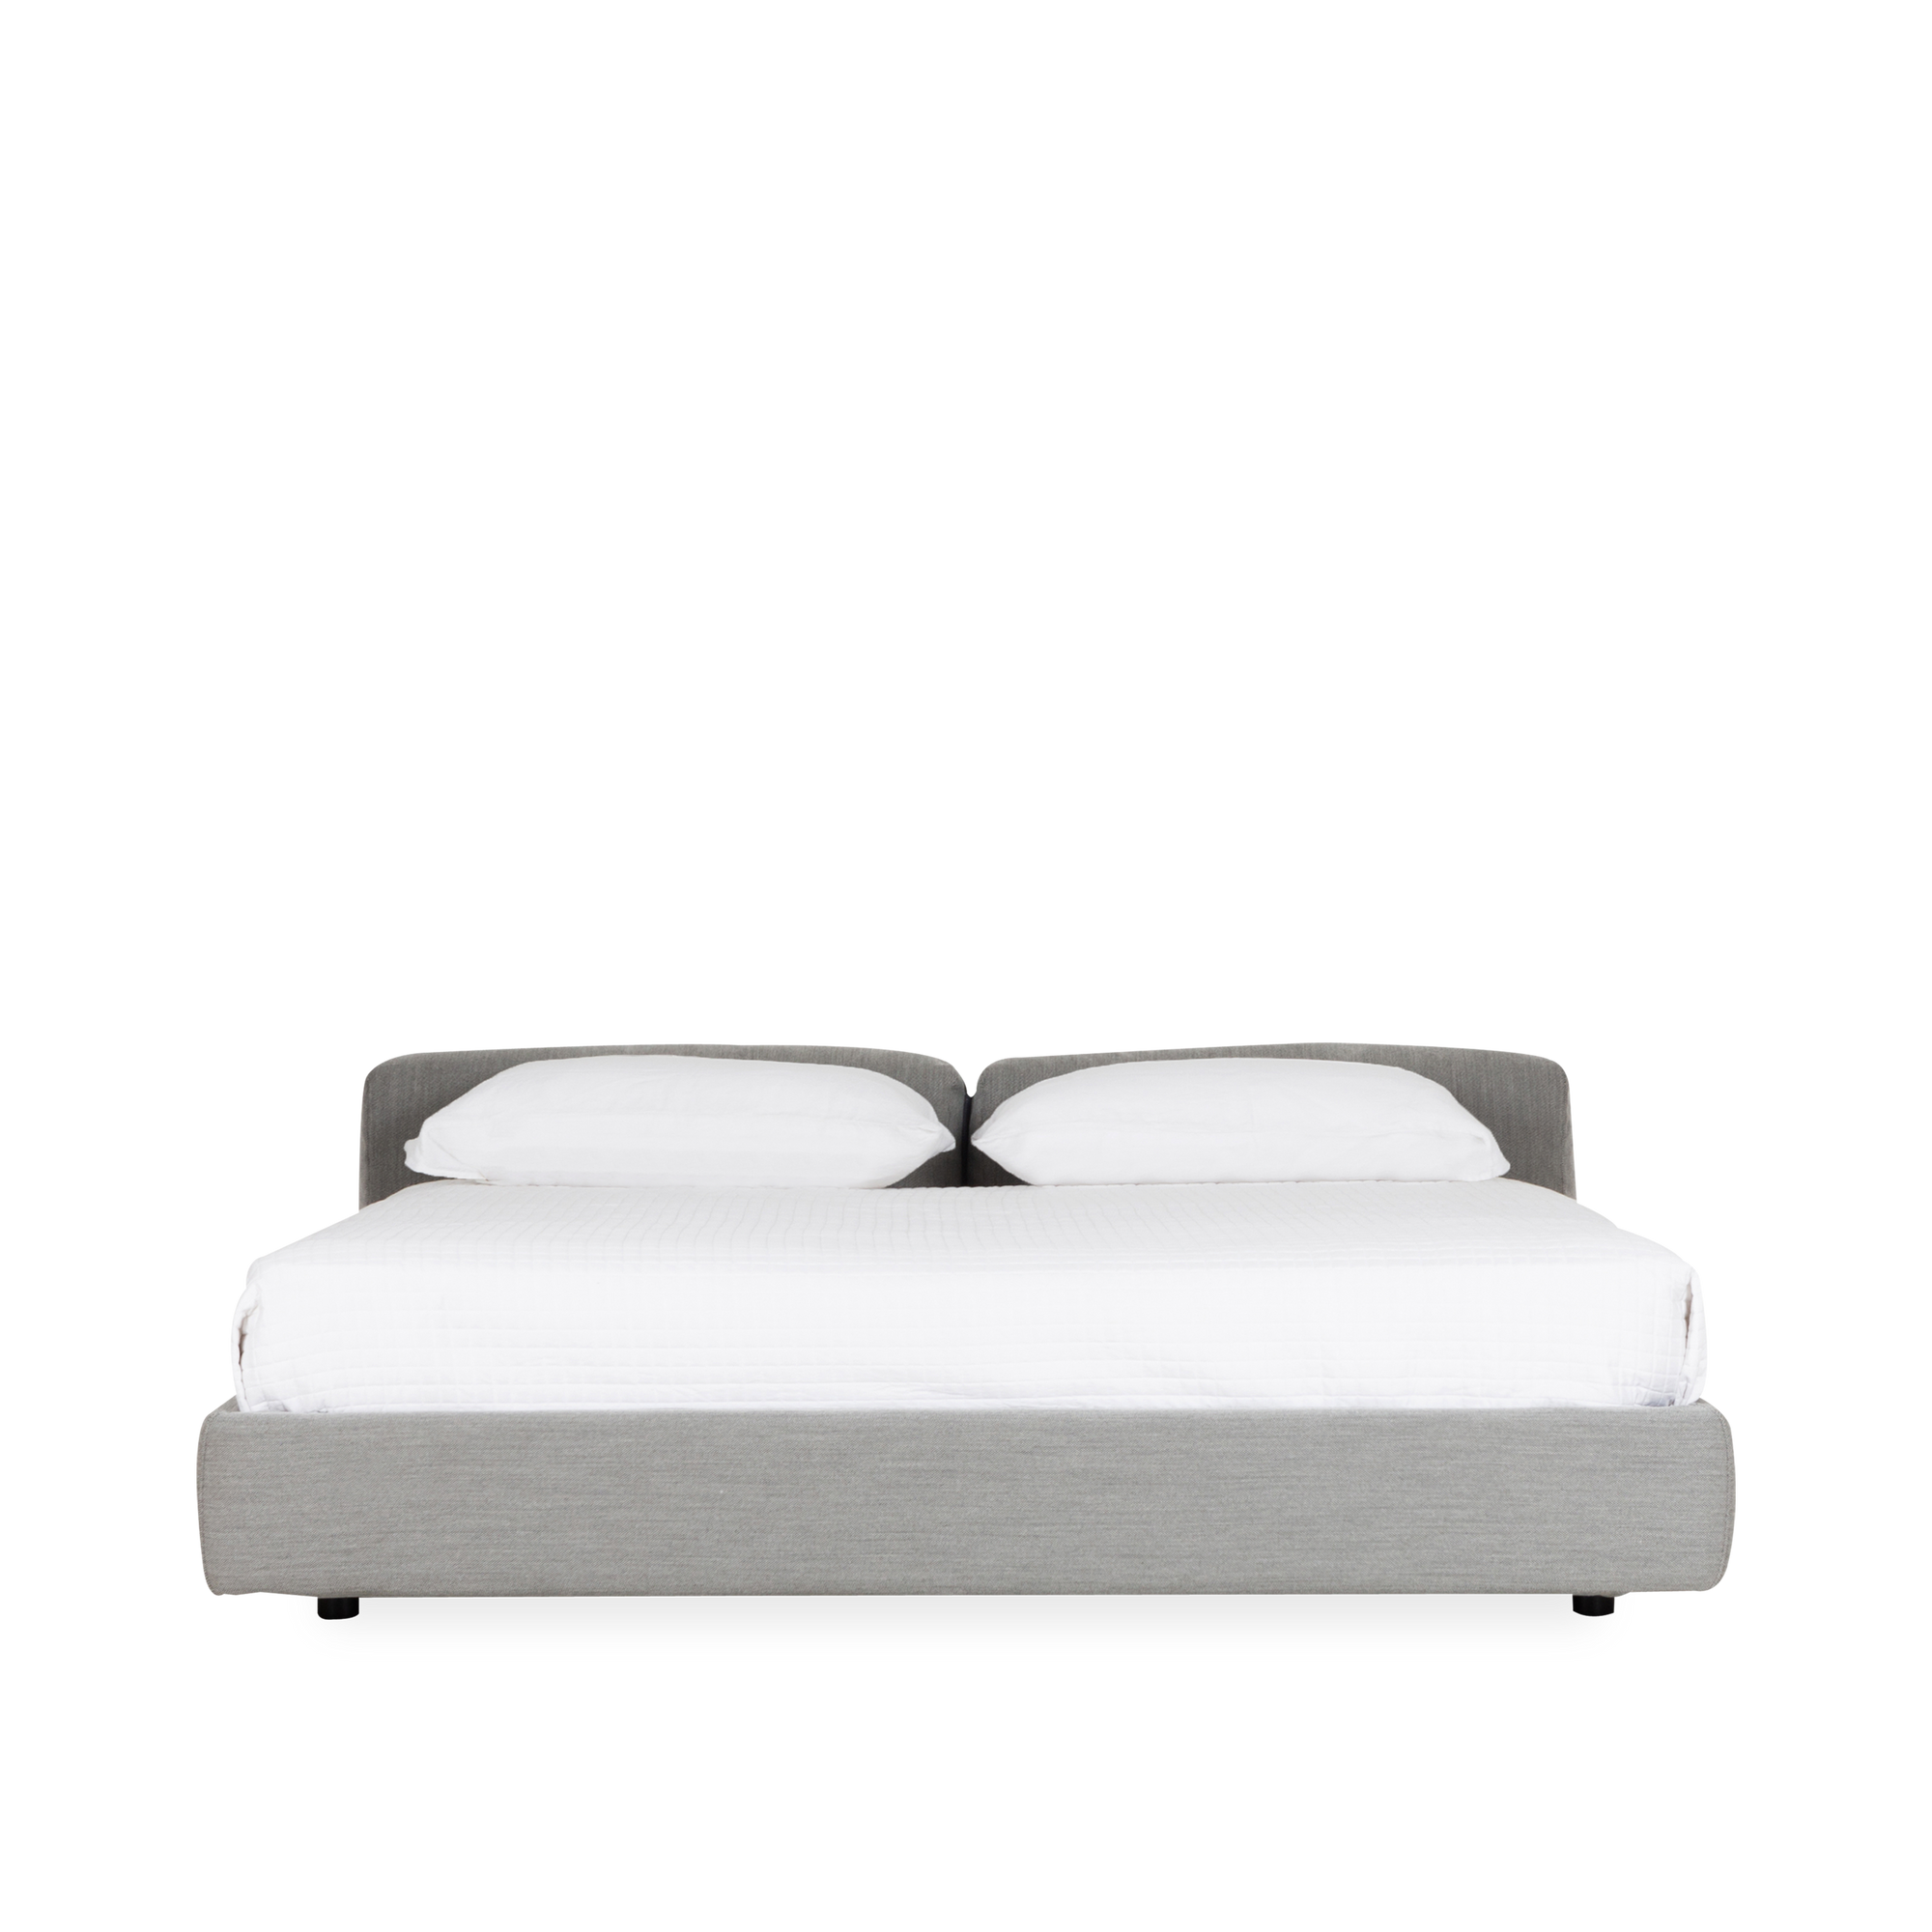 Superoblong King Bed